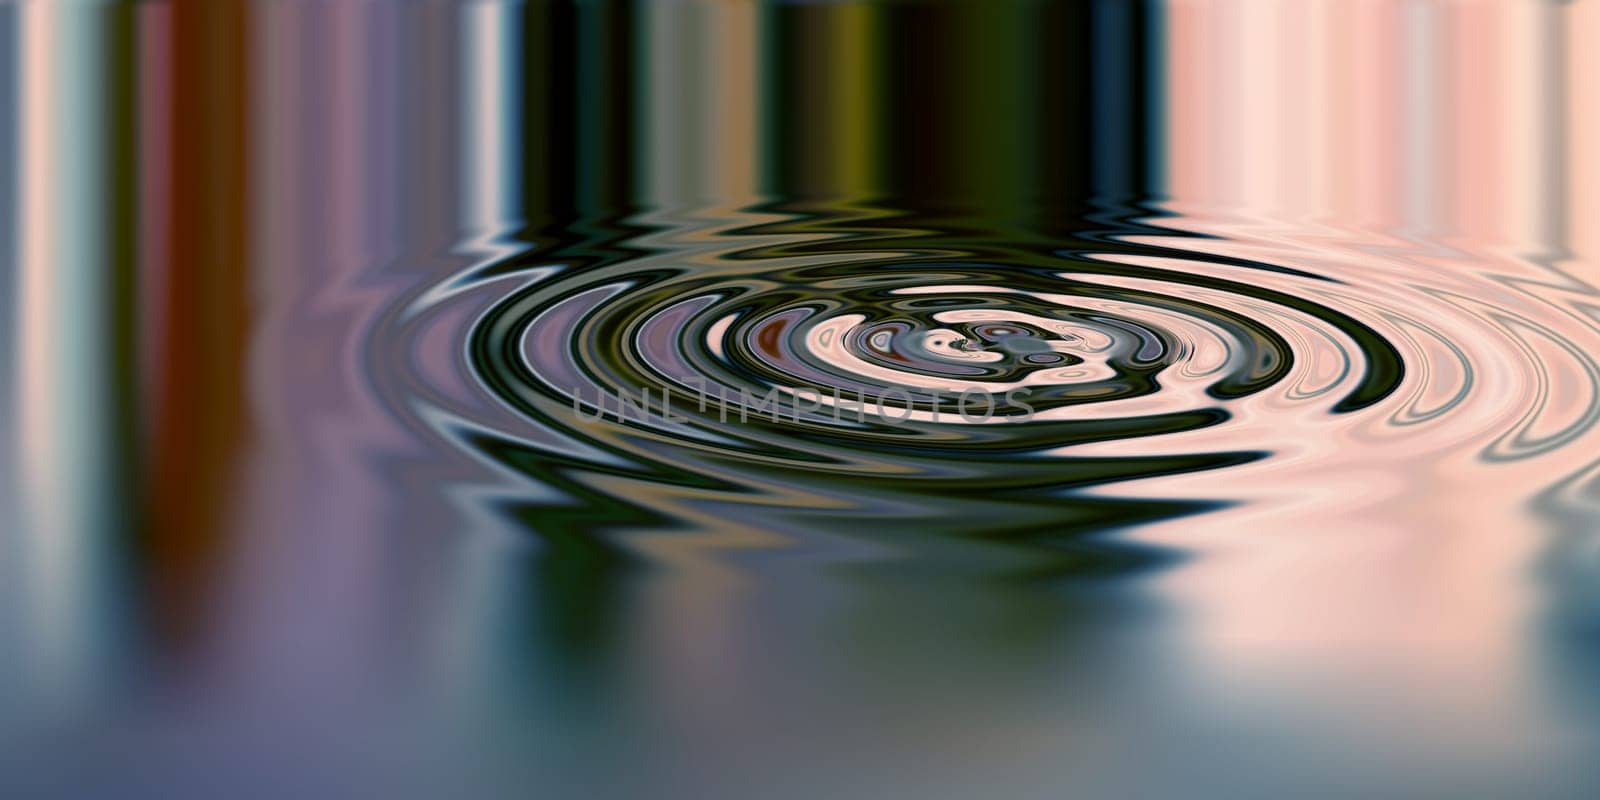 Waves, ripple and design with water drop pattern with mockup for 3d, digital and texture. Environment, reflection and futuristic with liquid in background for abstract, sustainability and art deco by YuriArcurs